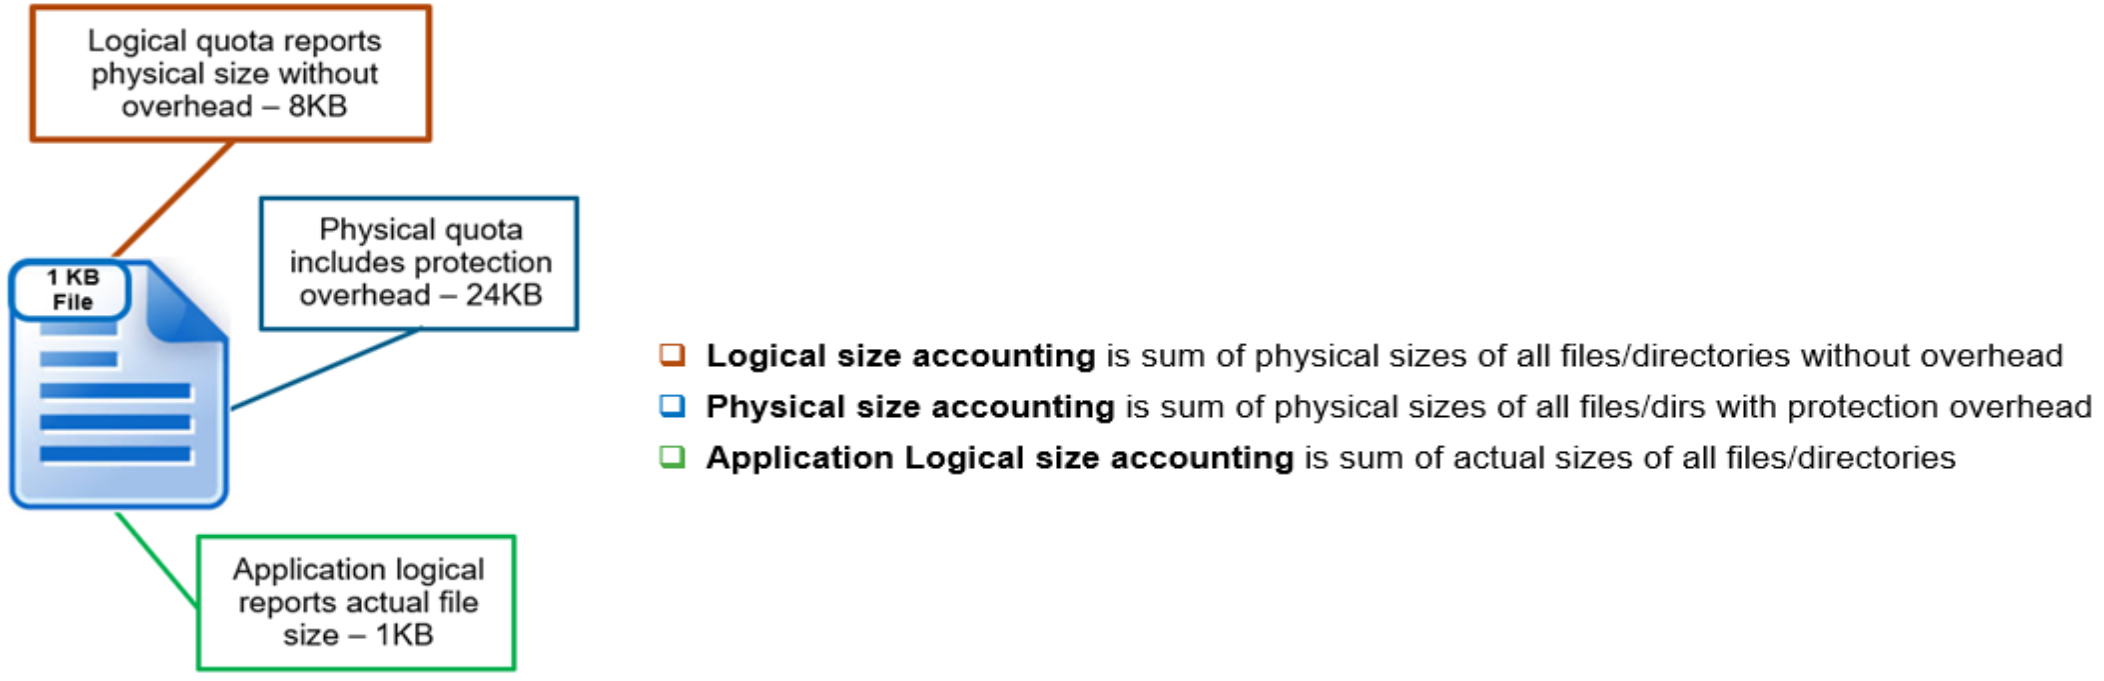 Illustration showing the quota accounting data types for logical, physical, and application size accounting.